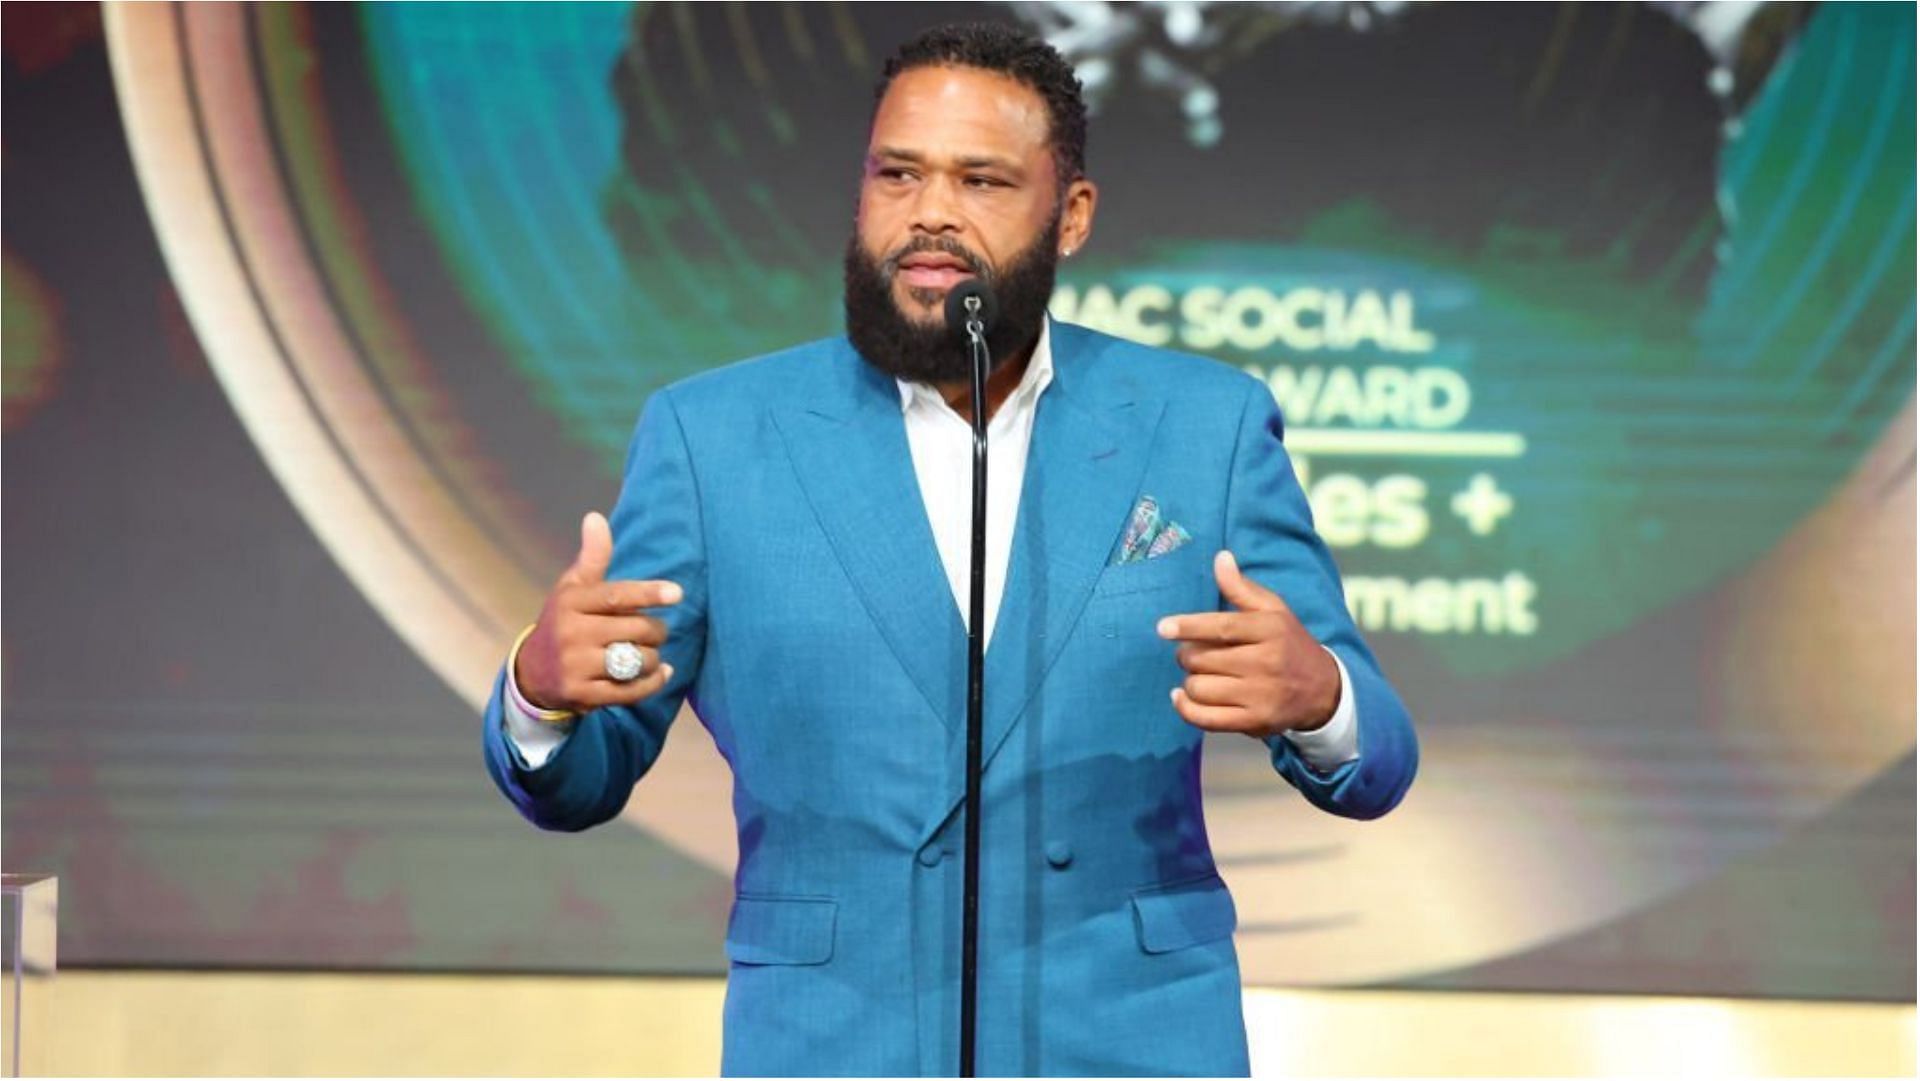 Anthony Anderson has suffered from type 2 diabetes for nearly 20 years (Photo by Leon Bennett / Getty Images)